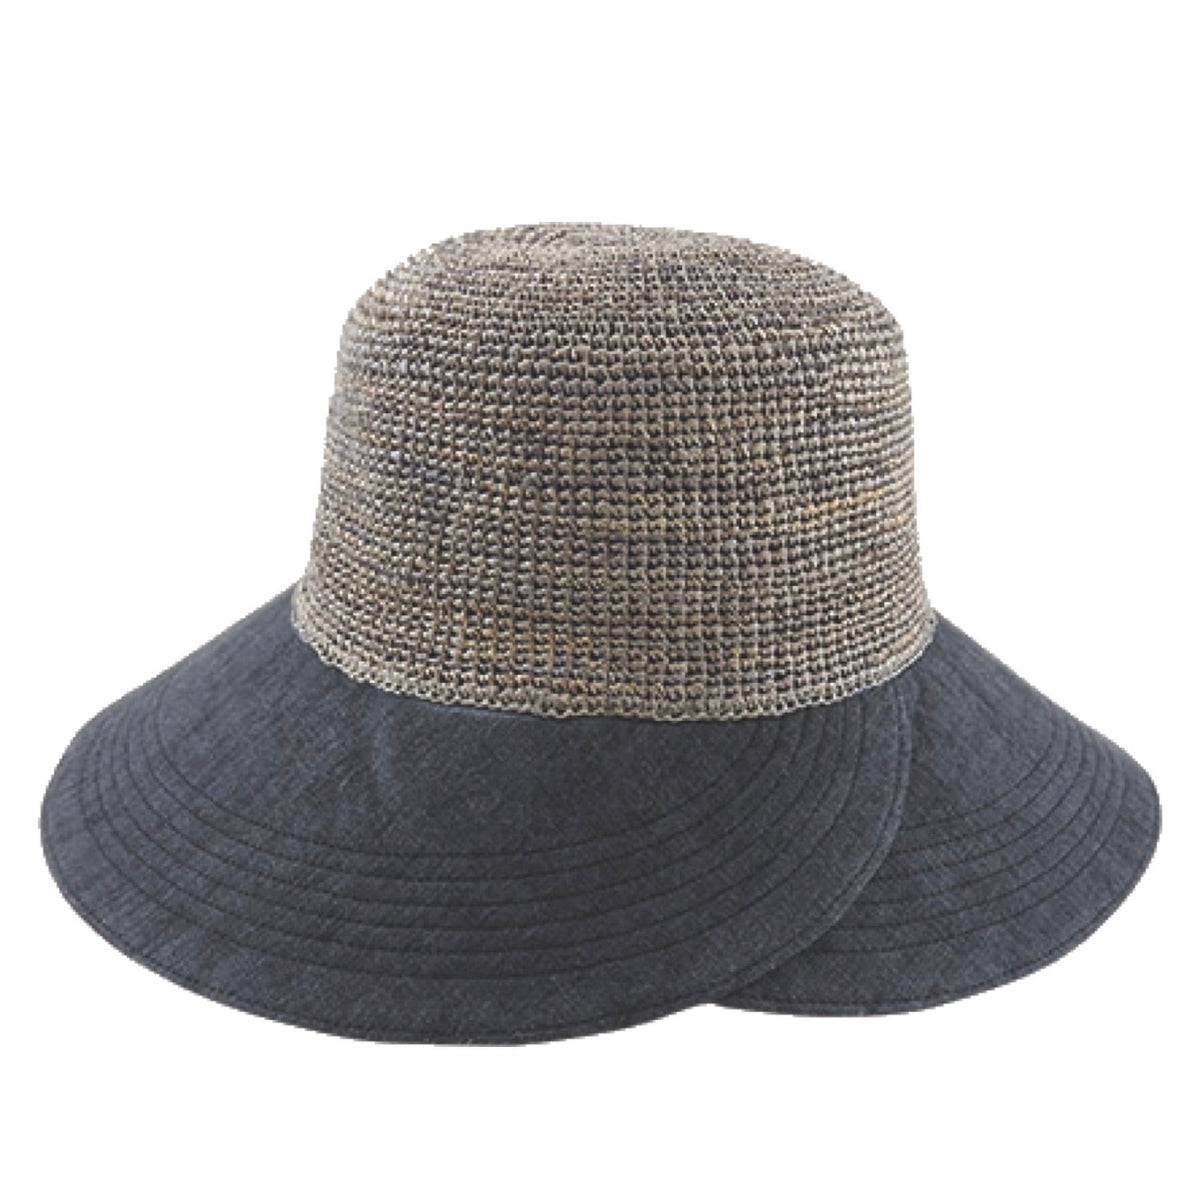 WOMEN's TRAVEL AND SUN HATS – Smart Alec Hatters